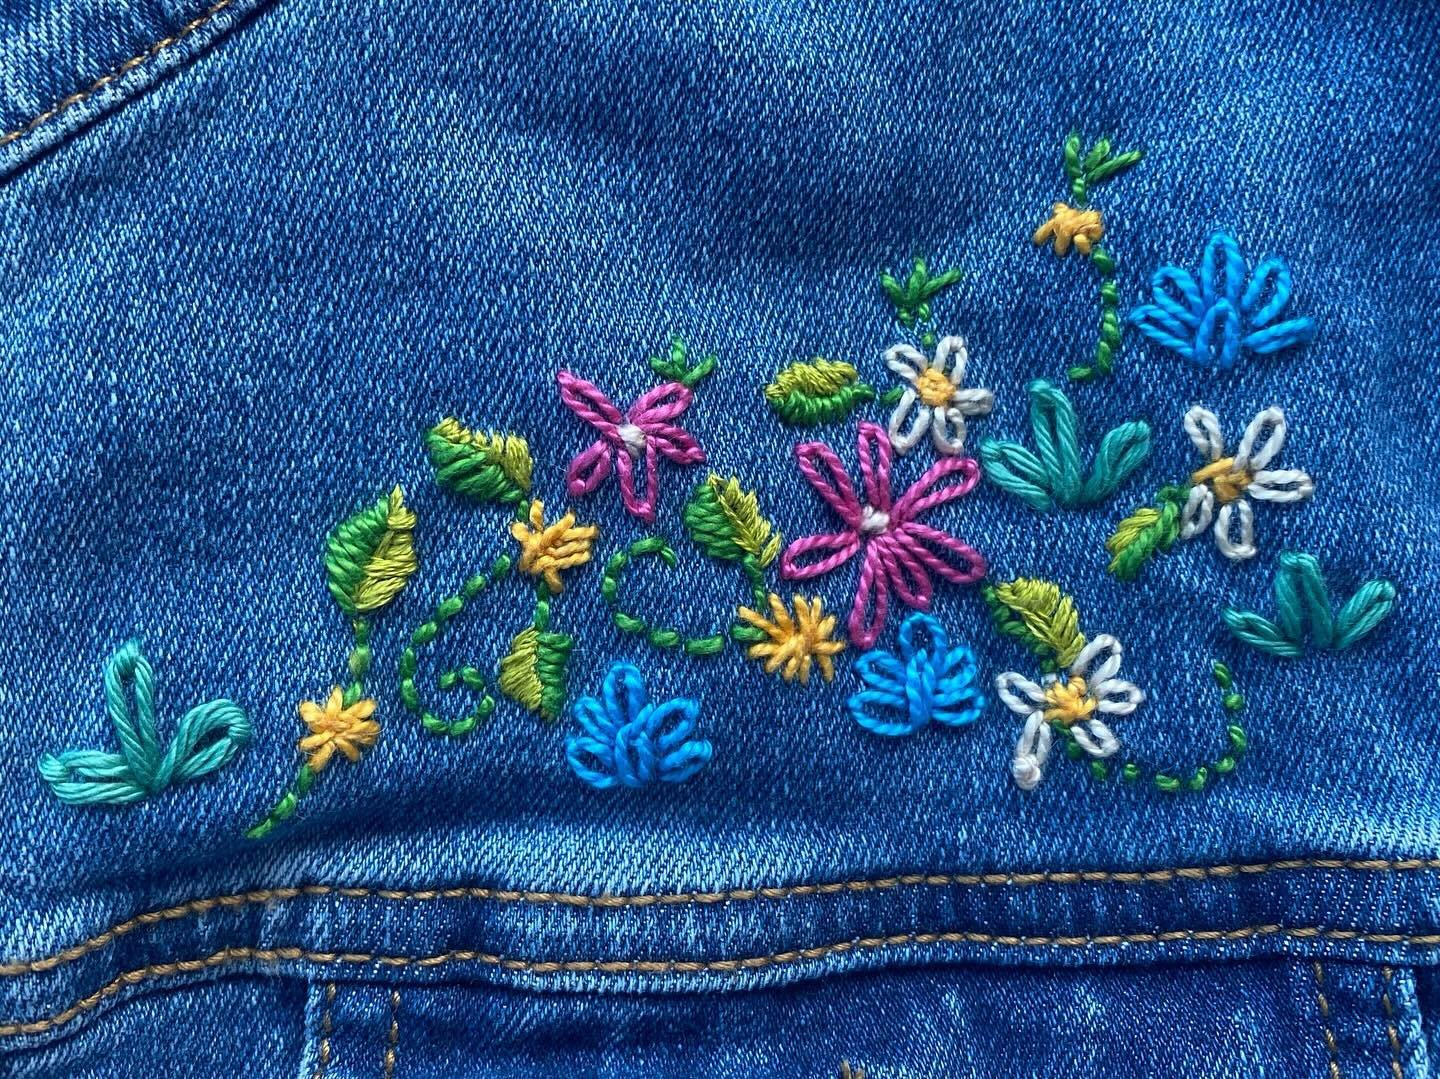 When your granddaughter asks you to stitch some flowers on her denim jacket, you do it. 🌸🌻🌱🌼🪻🌝🌿